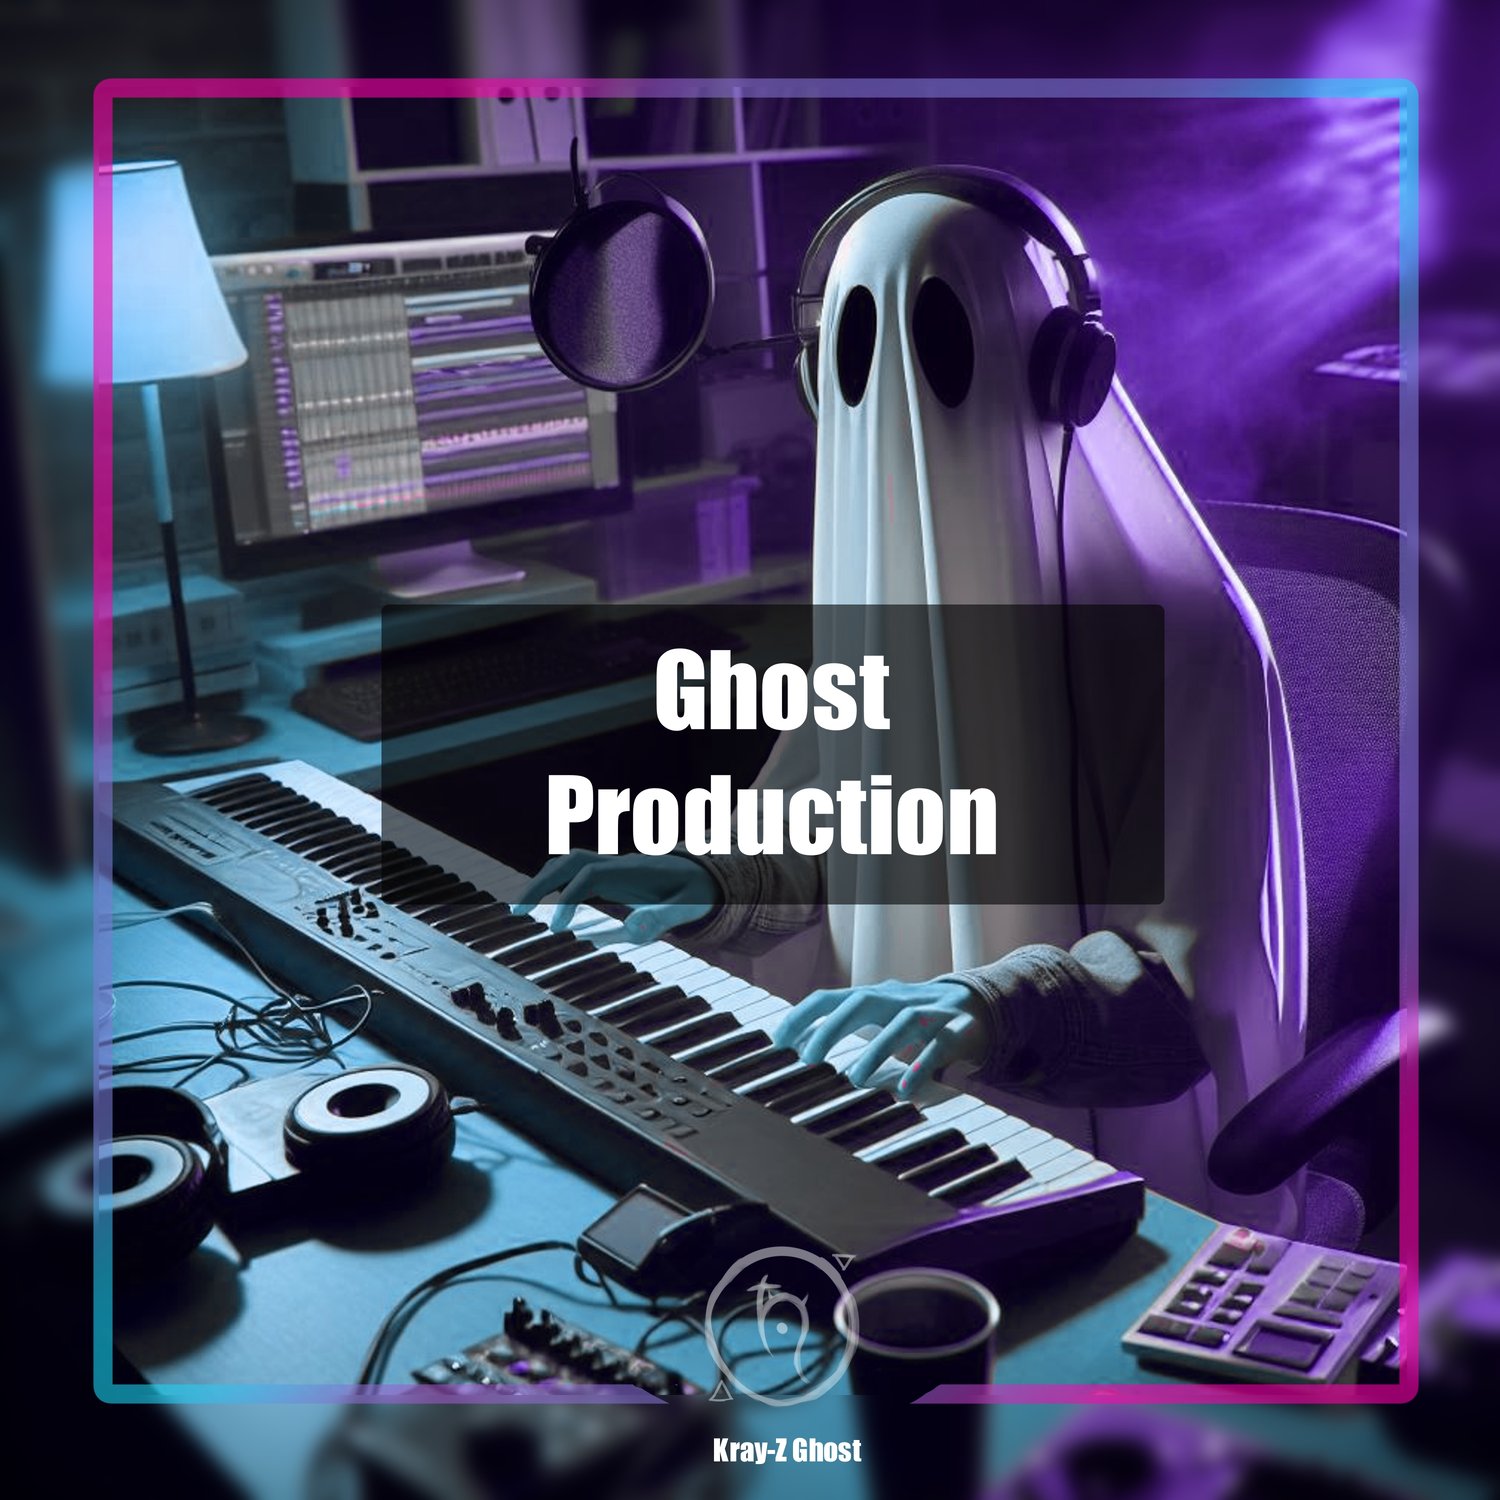 Professional Ghost Producer in home studio